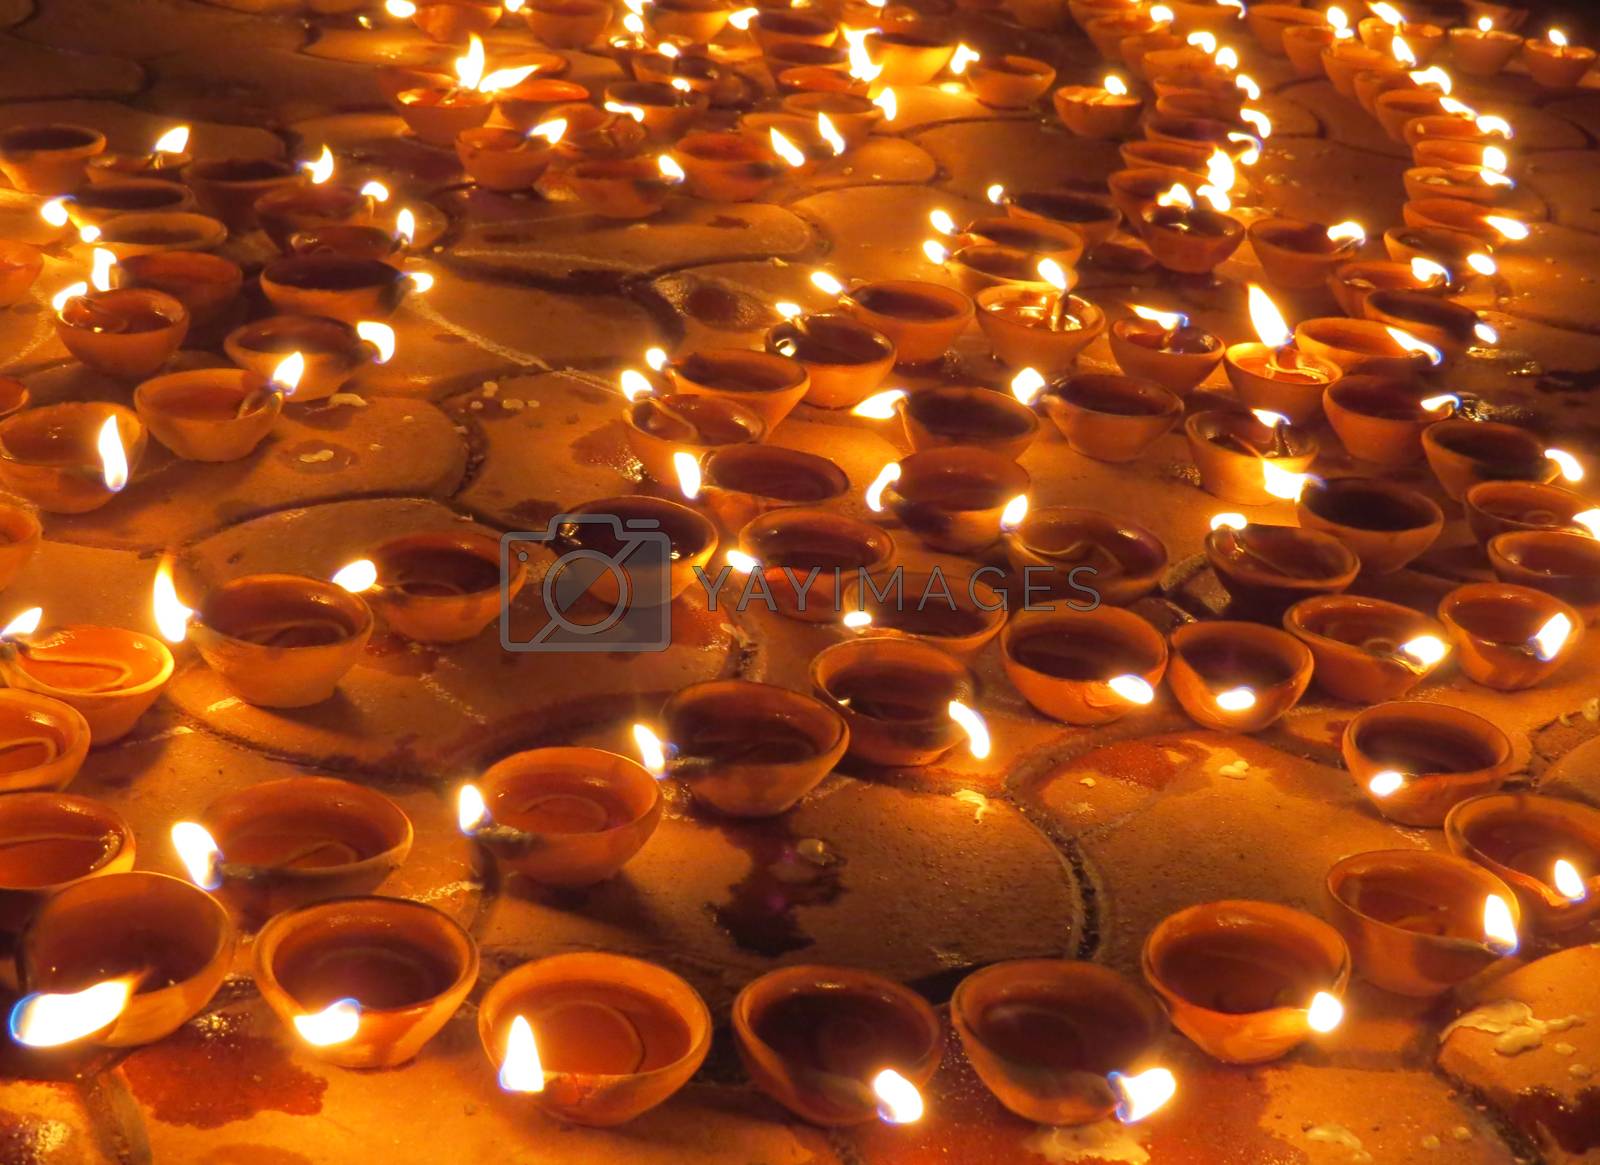 Royalty free image of Diwali Lamps for Decoration by thefinalmiracle